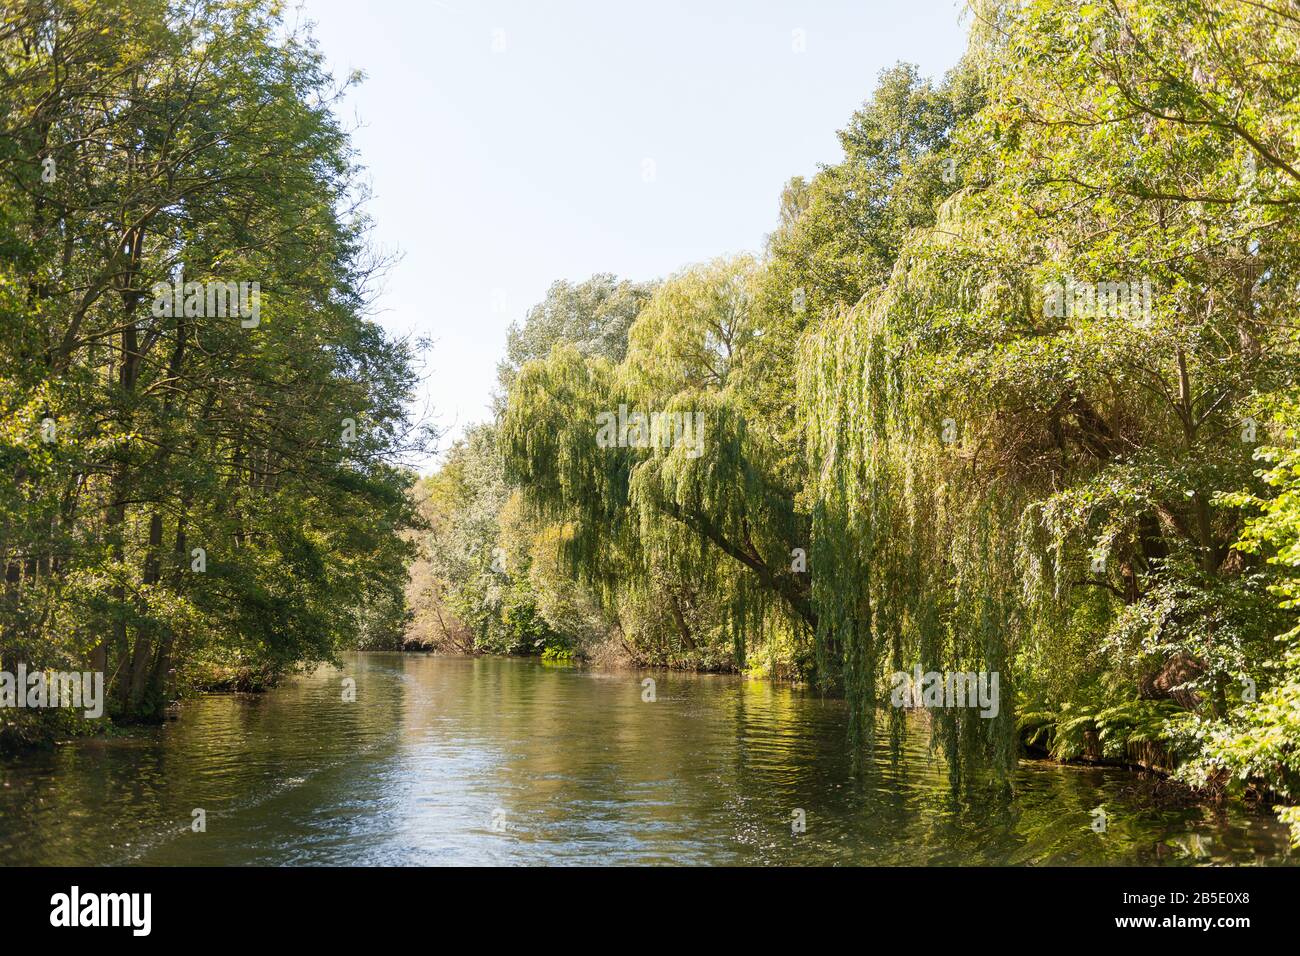 River Wakenitz, connecting Lake Ratzeburg with Lübeck, Baltic Sea, county of Lauenburg, Schleswig-Holstein, North Germany, Central  Europe Stock Photo